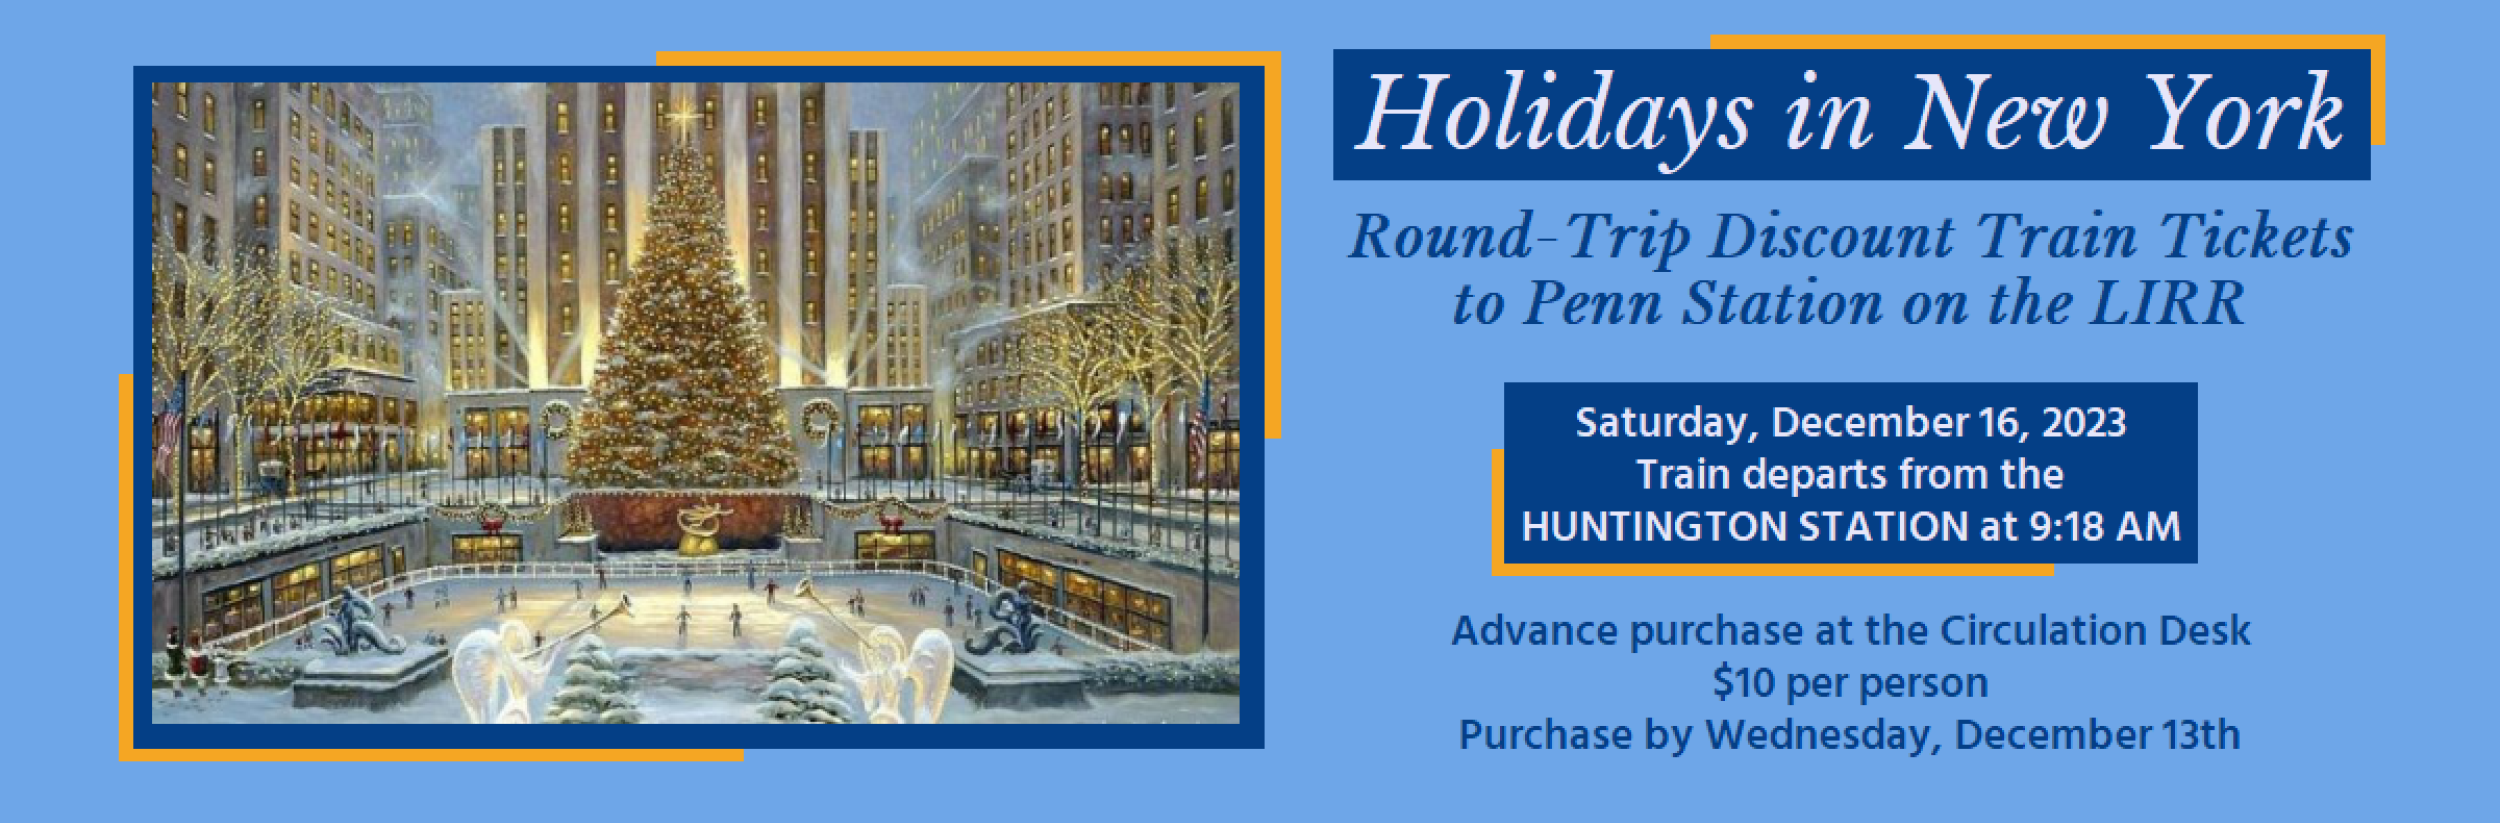 Image for "Holidays in New York: Round Trip Discount Train Tickets 2023"